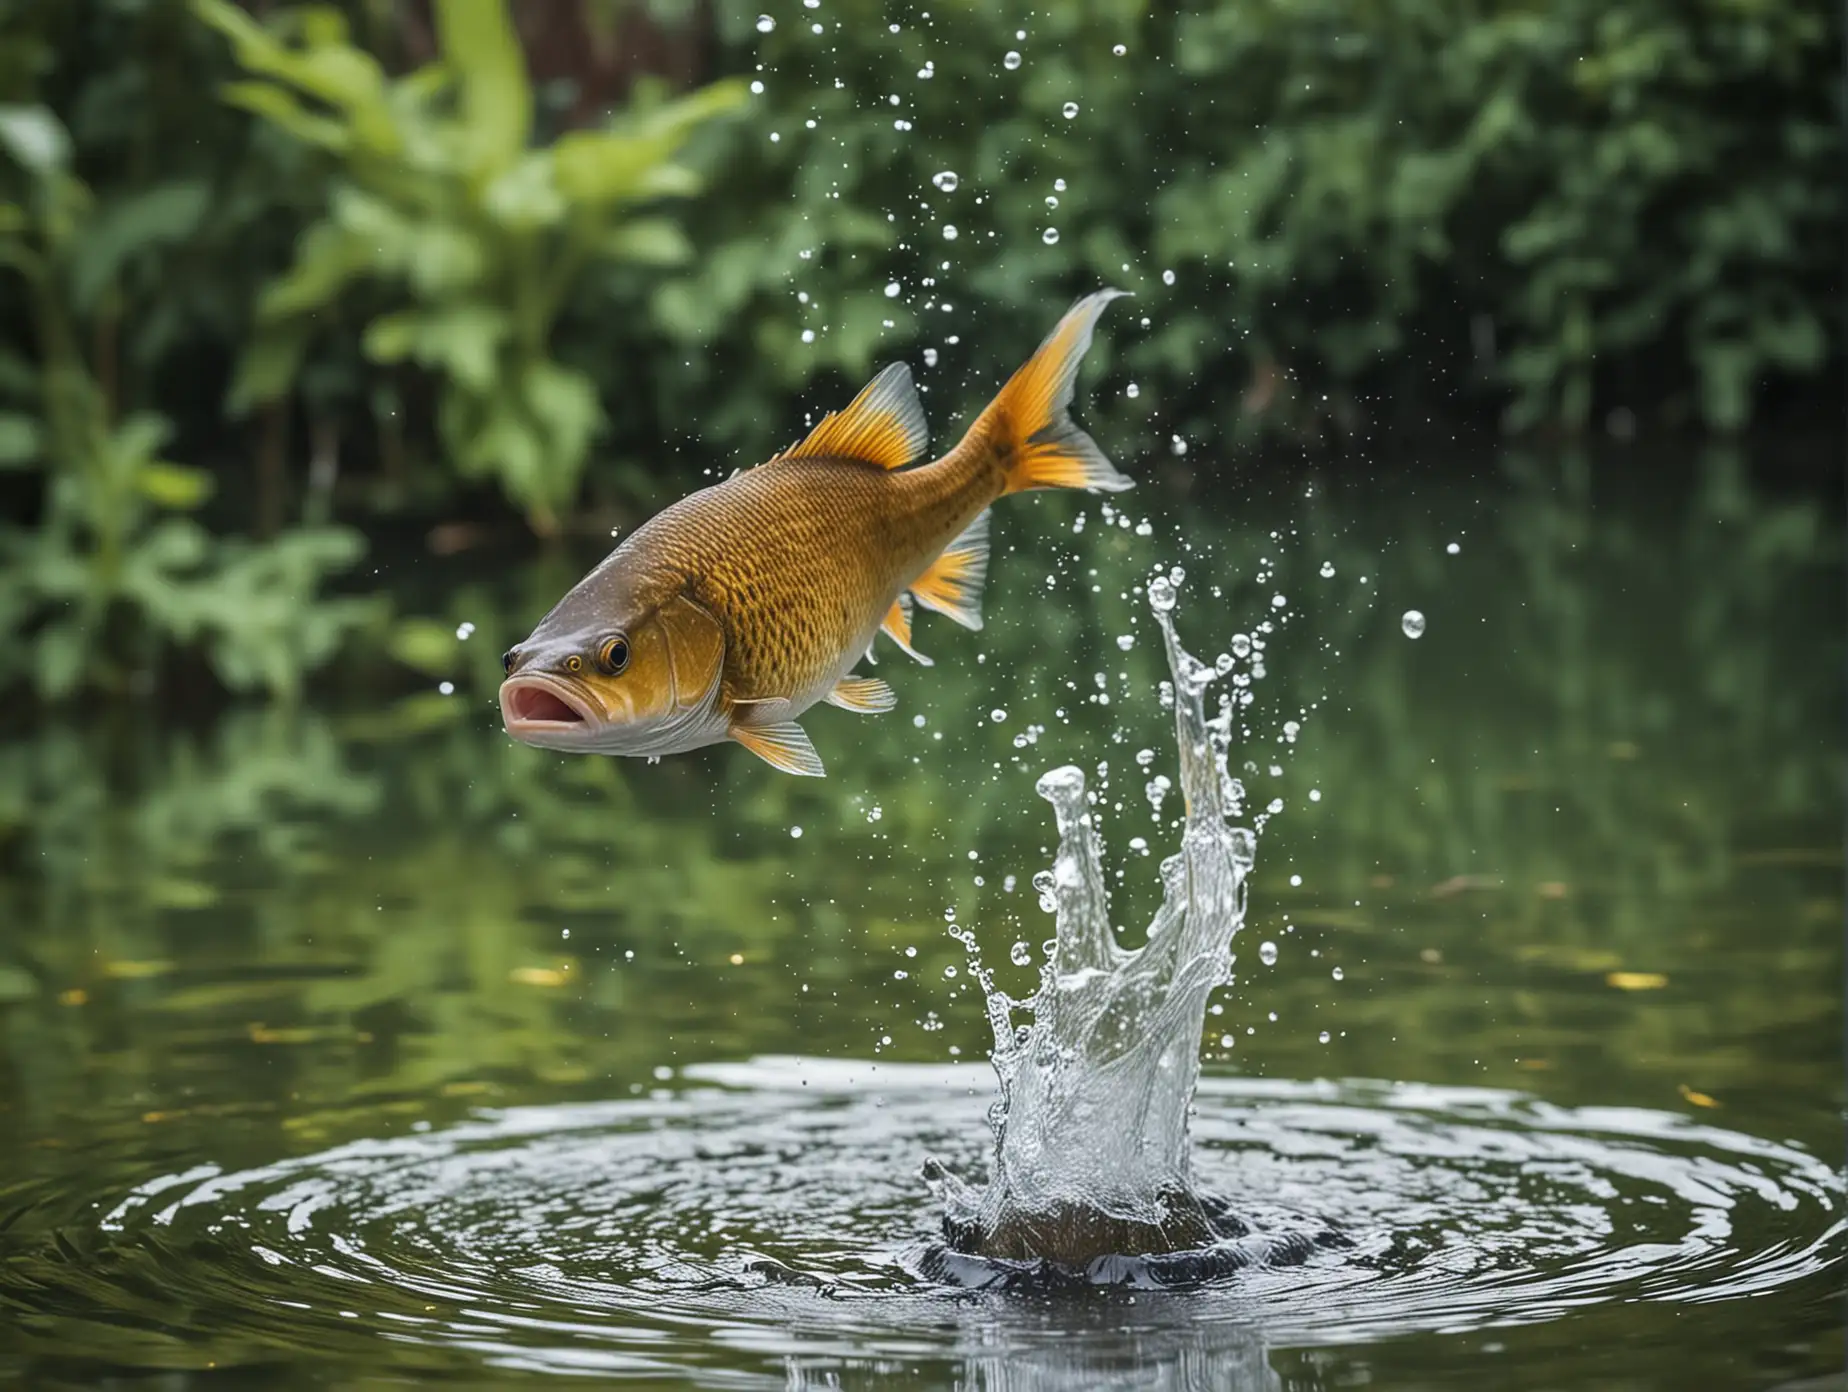 Vibrant Fish Leaping from Sunlit Pond Waters